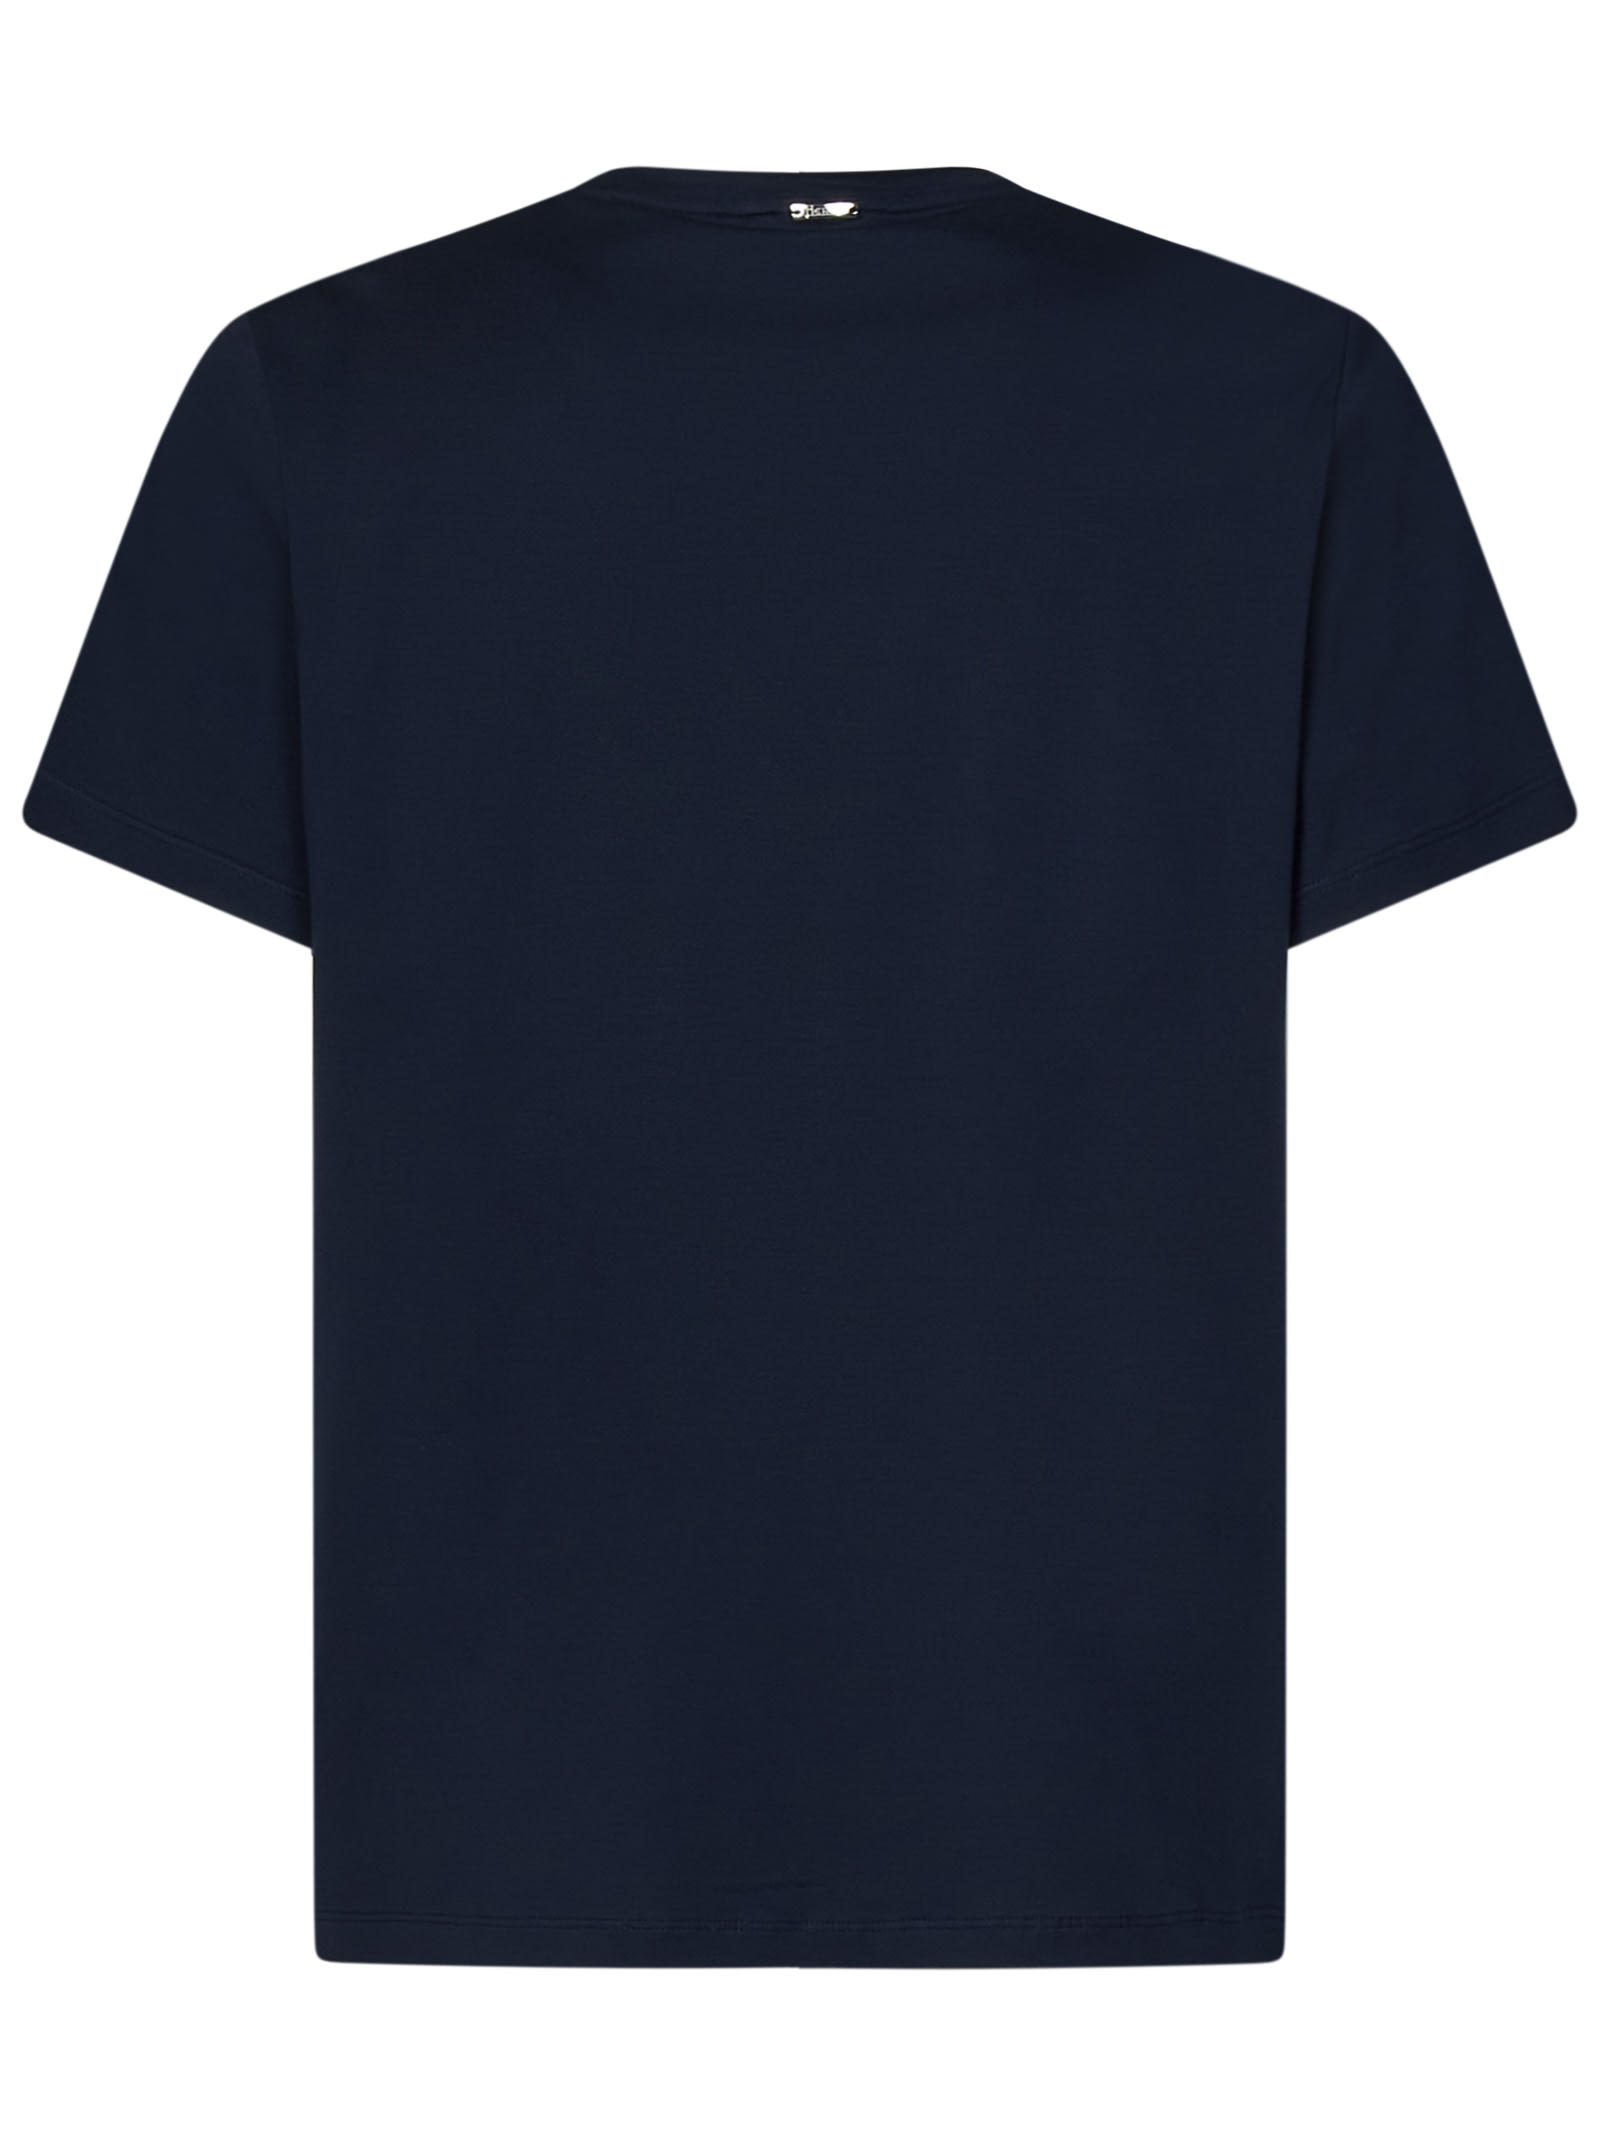 Shop Herno T-shirt In Blue